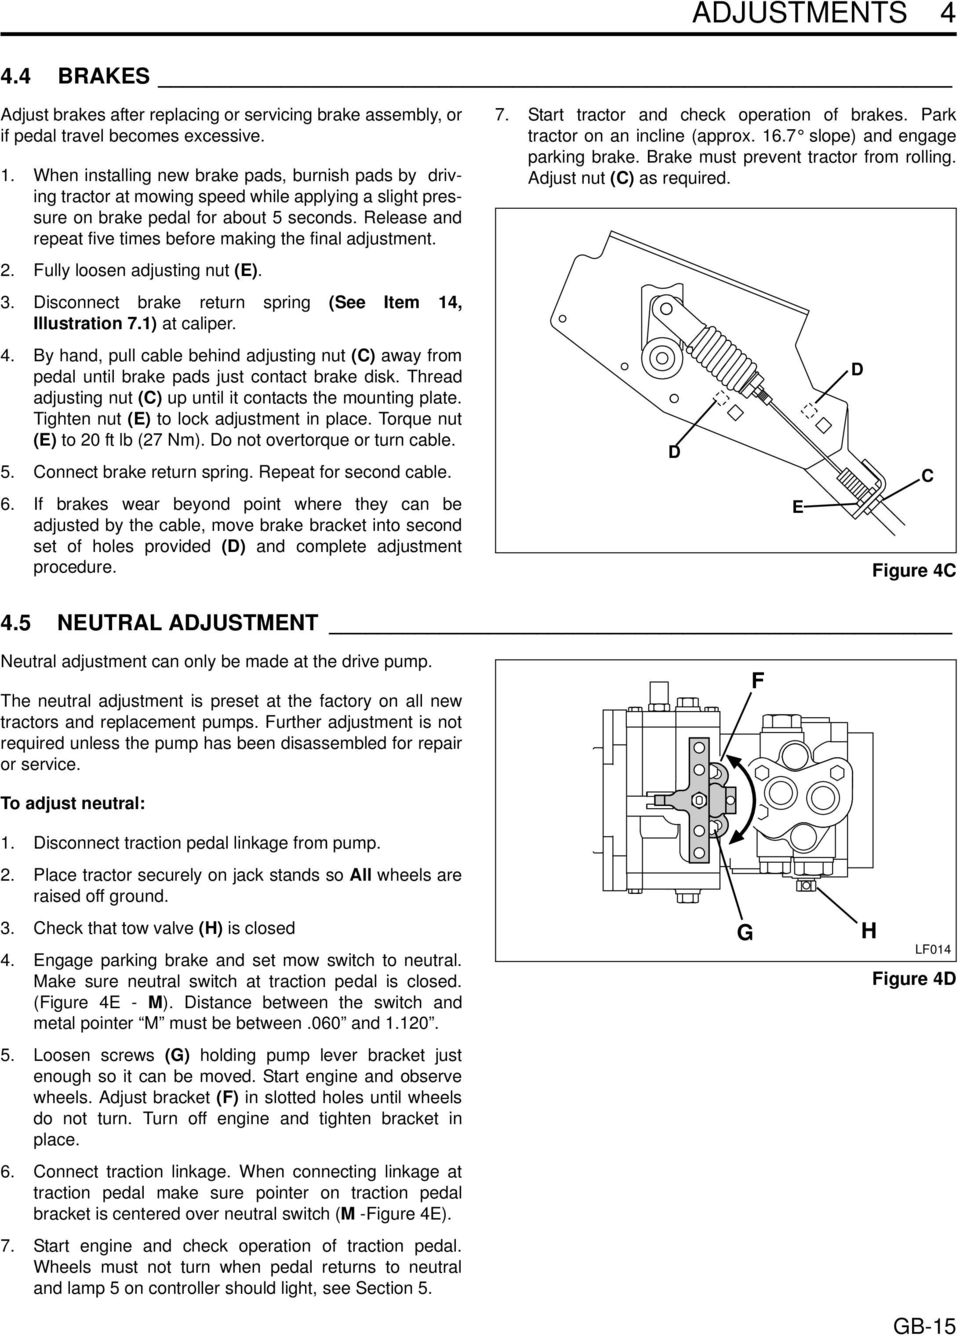 Release and repeat five times before making the final adjustment. 2. Fully loosen adjusting nut (E). 3. Disconnect brake return spring (See Item 14, Illustration 7.1) at caliper. 4.